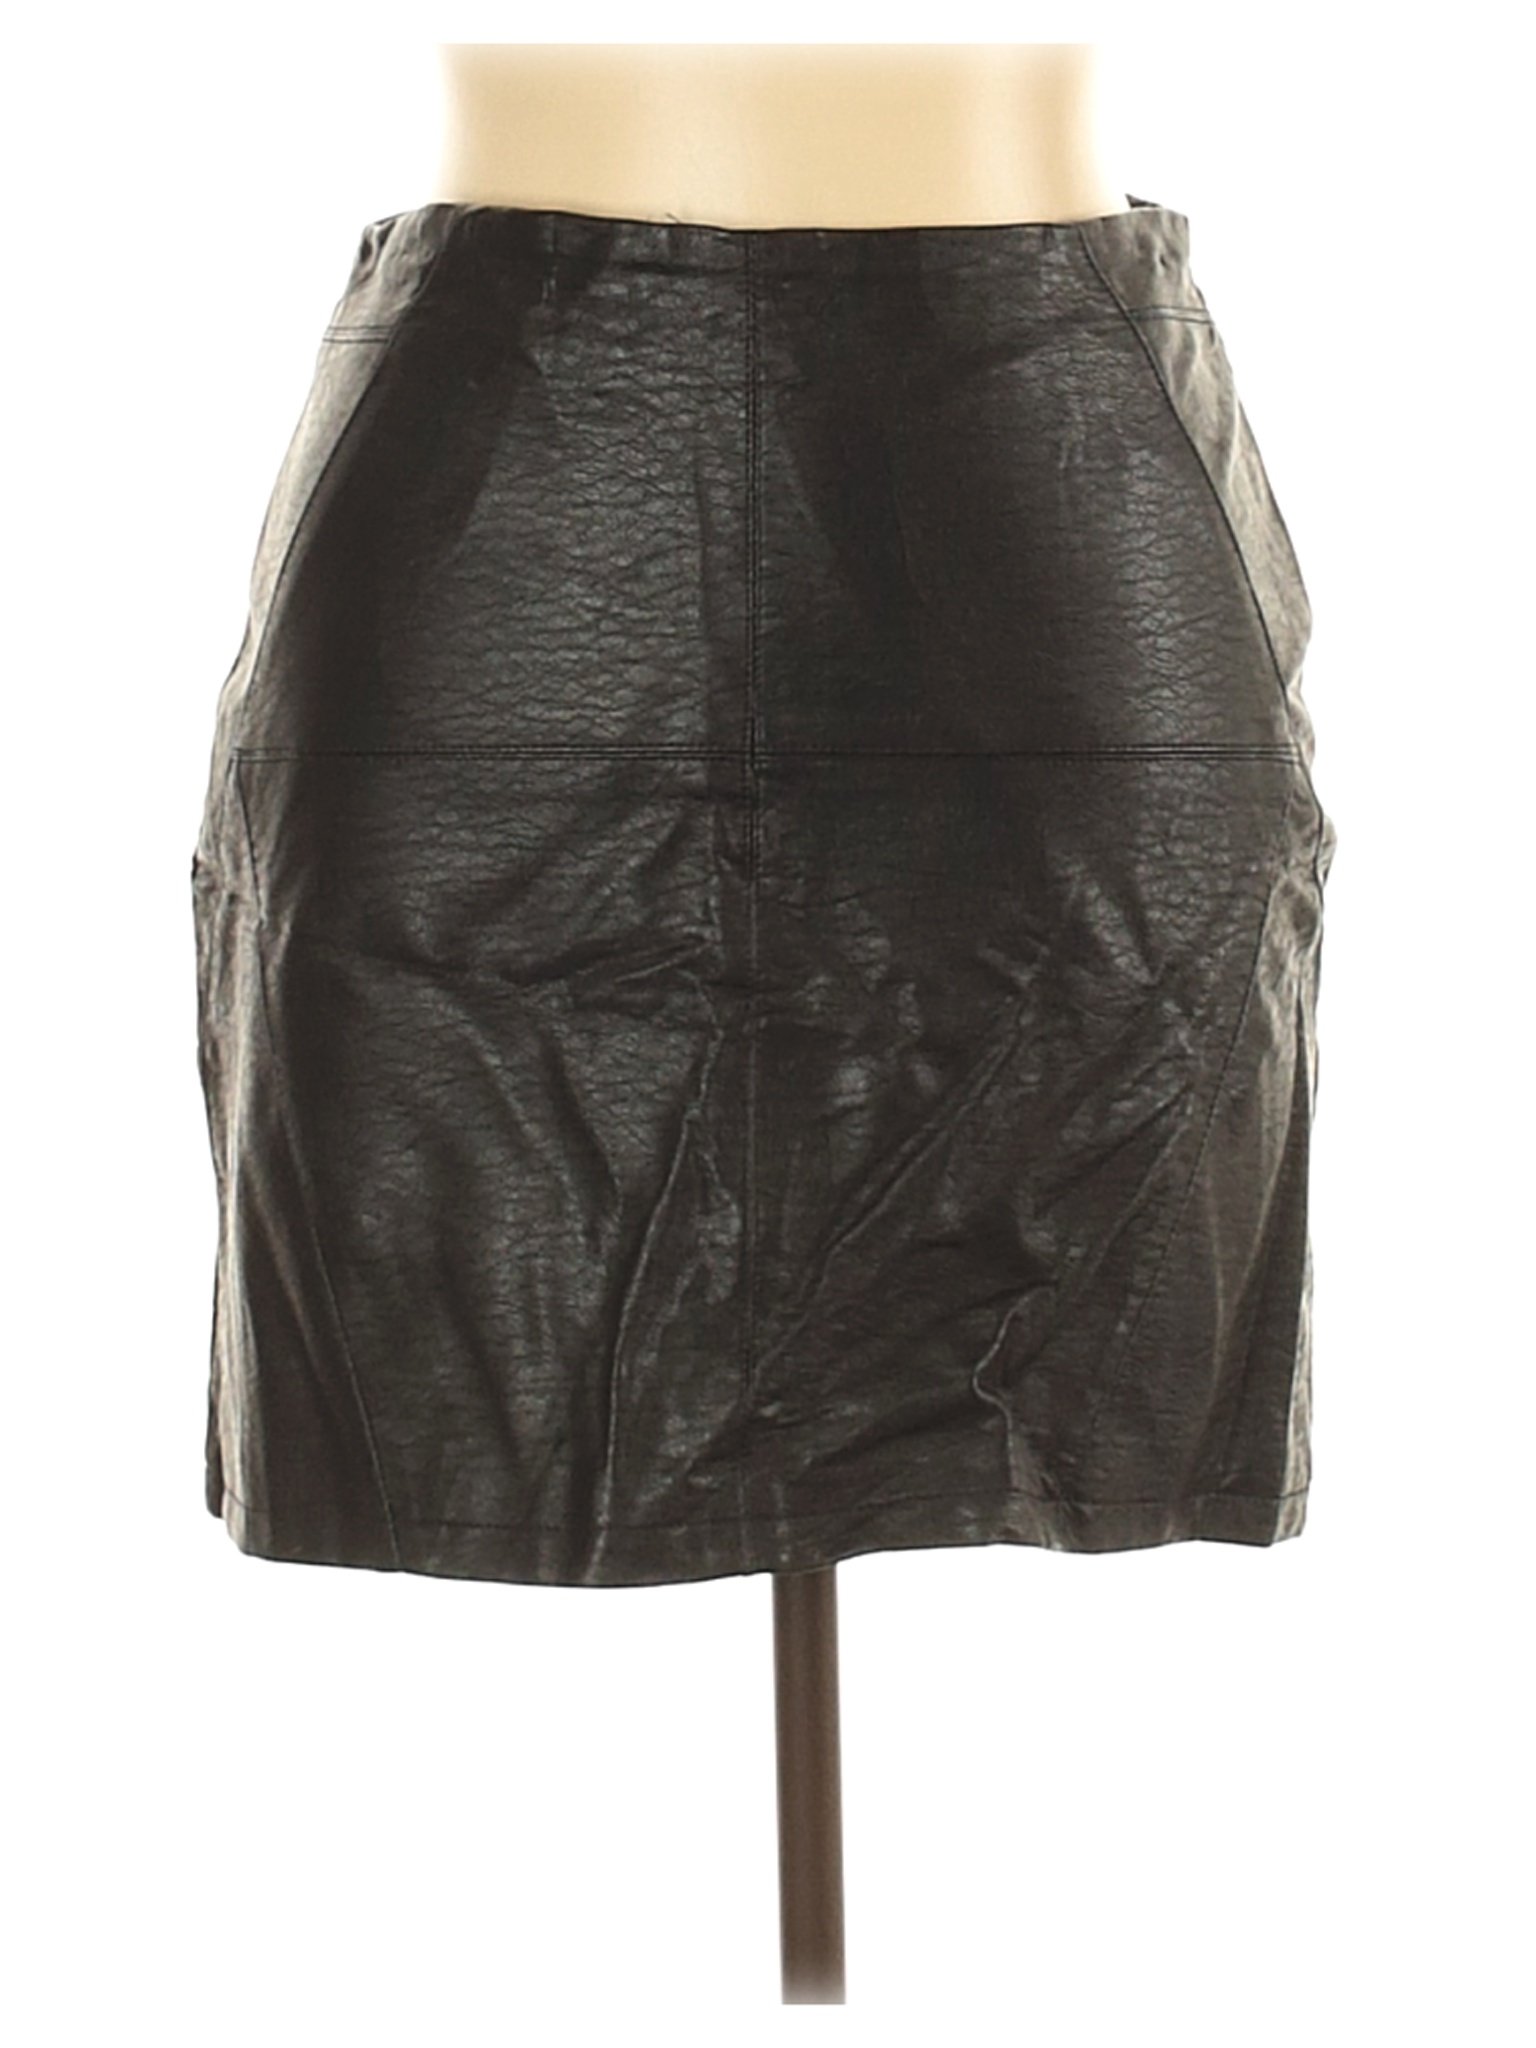 Divided by H&M Women Black Faux Leather Skirt 10 | eBay